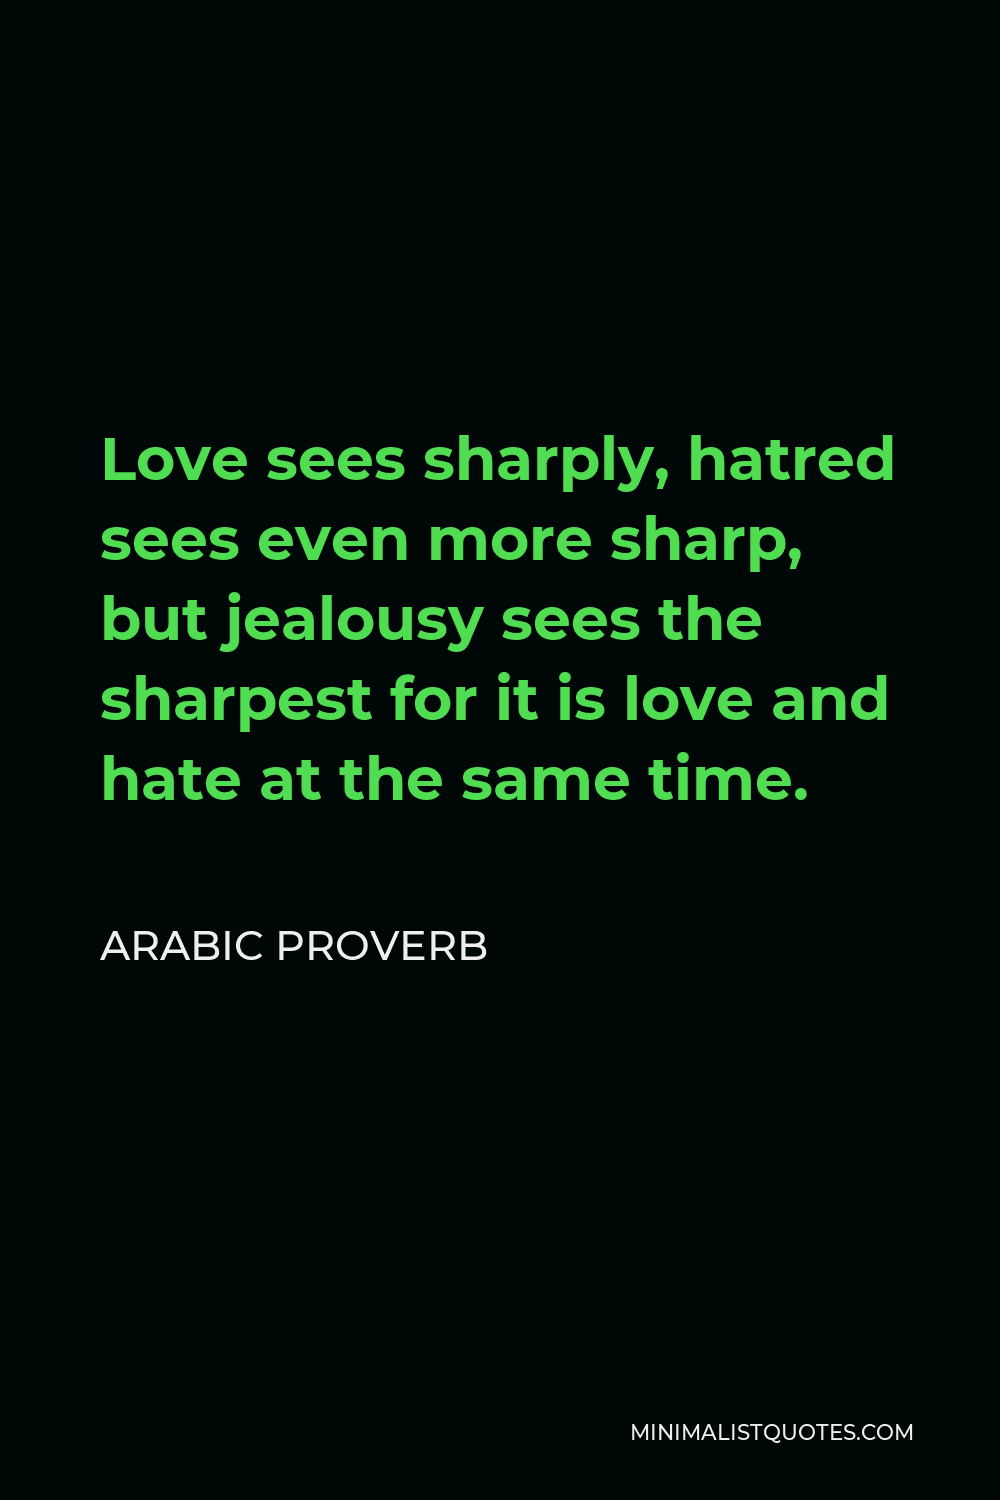 Arabic Proverb Quote - Love sees sharply, hatred sees even more sharp, but jealousy sees the sharpest for it is love and hate at the same time.